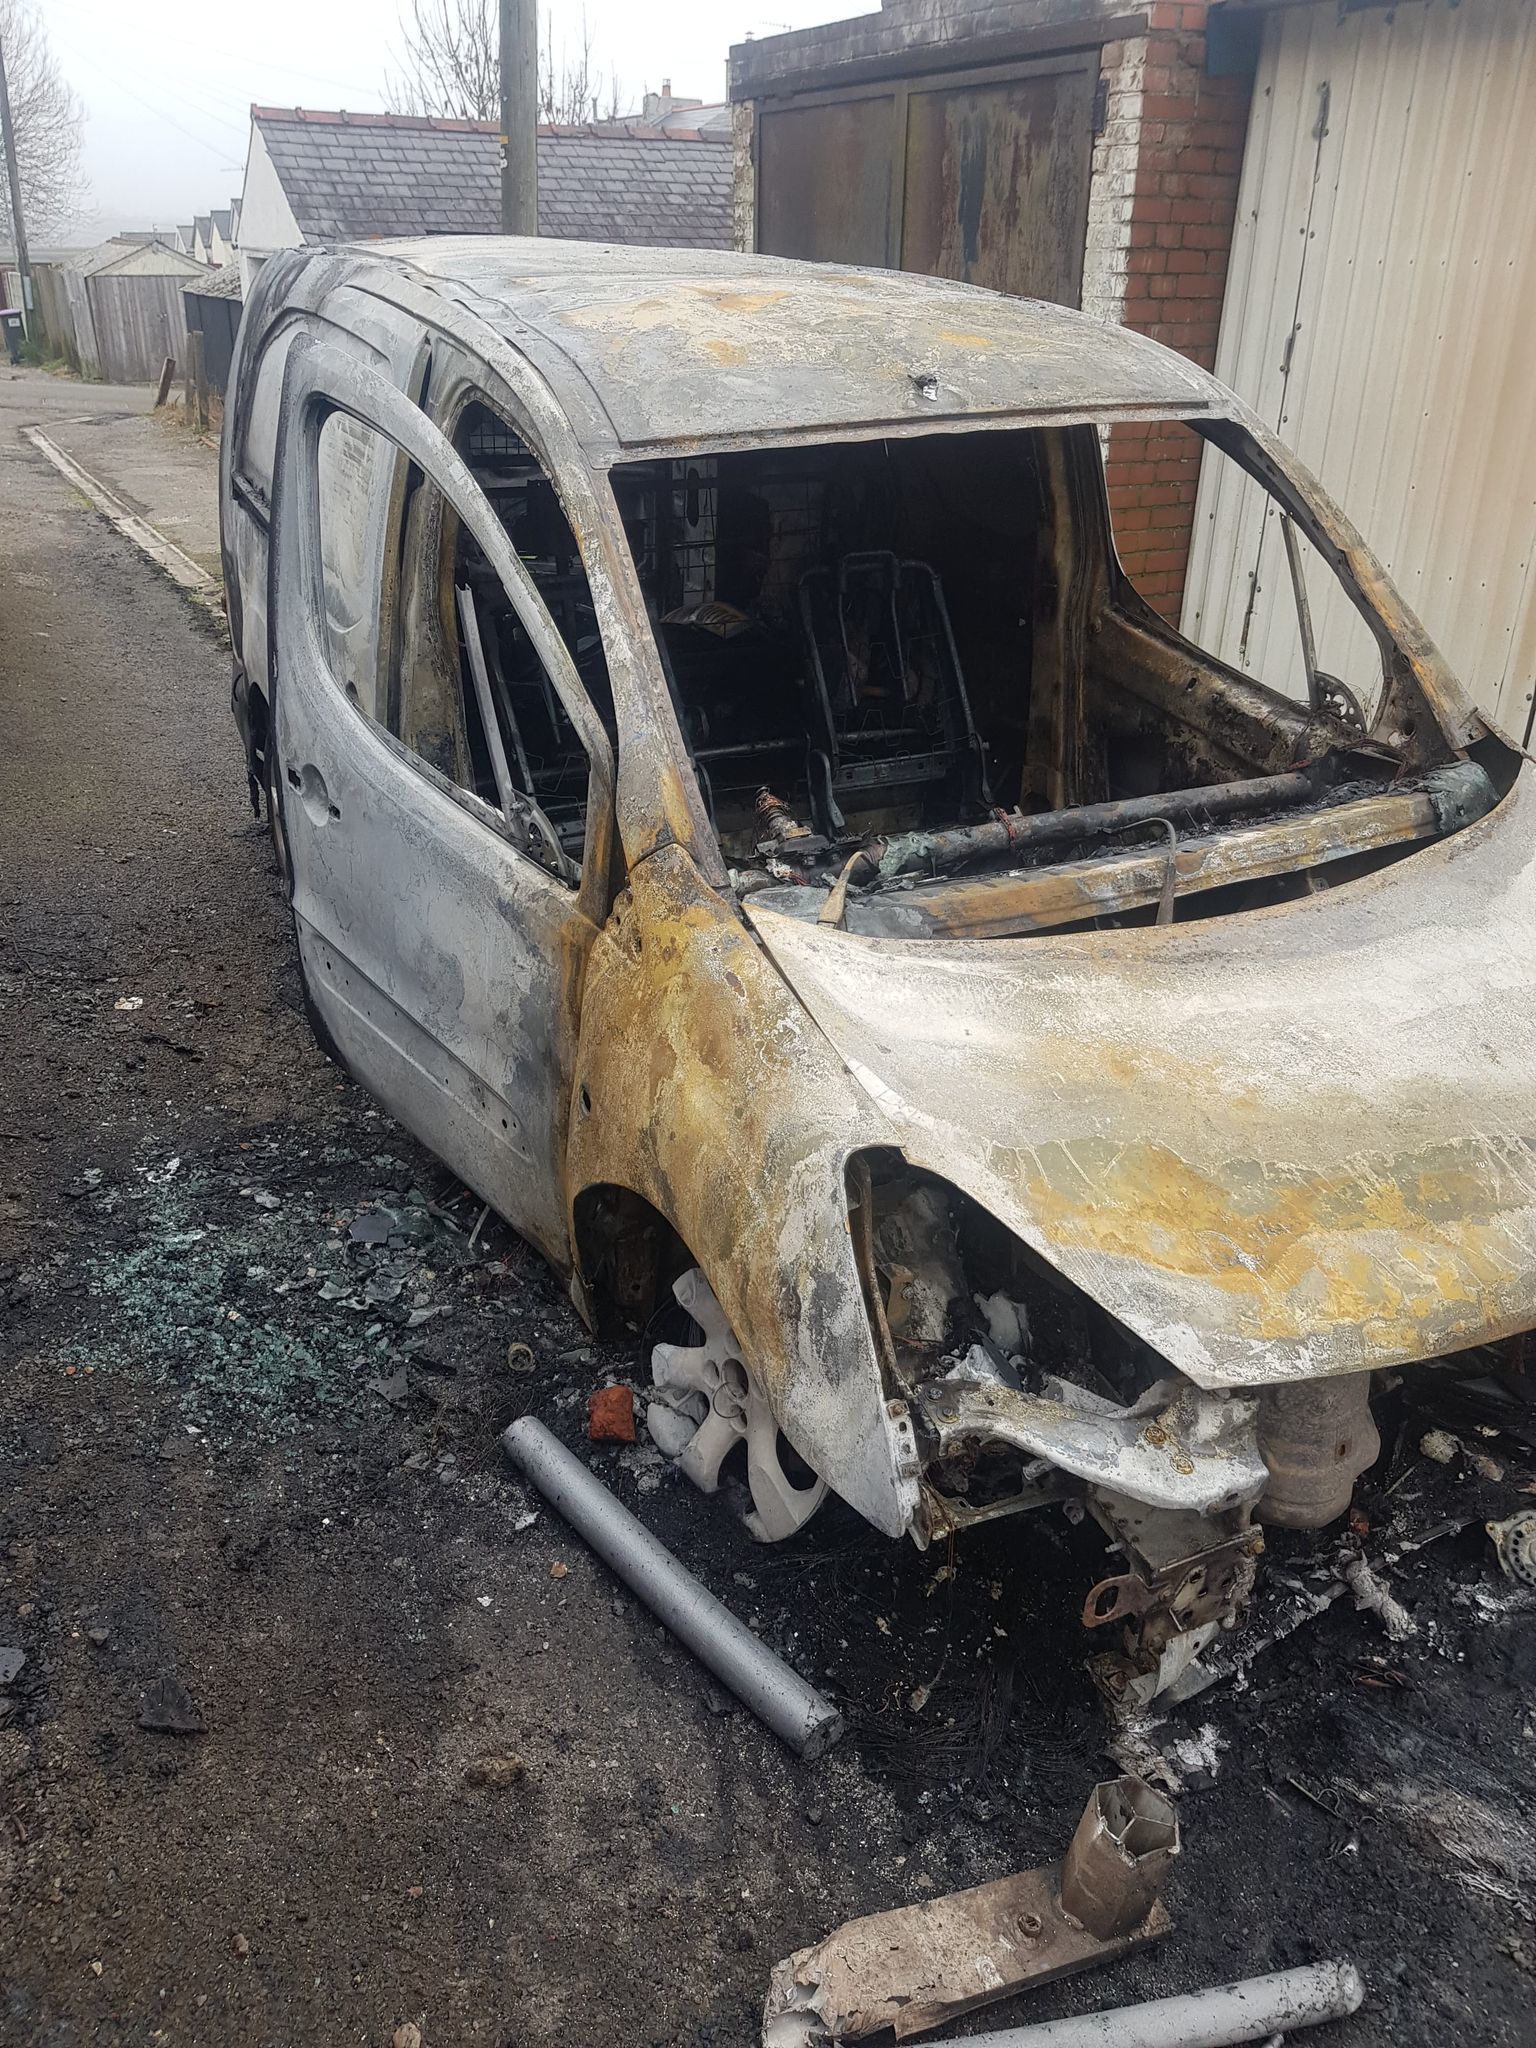 Tim Cantelo’s van was burnt out overnight in Griffithstown. Picture: Tim Cantelo.